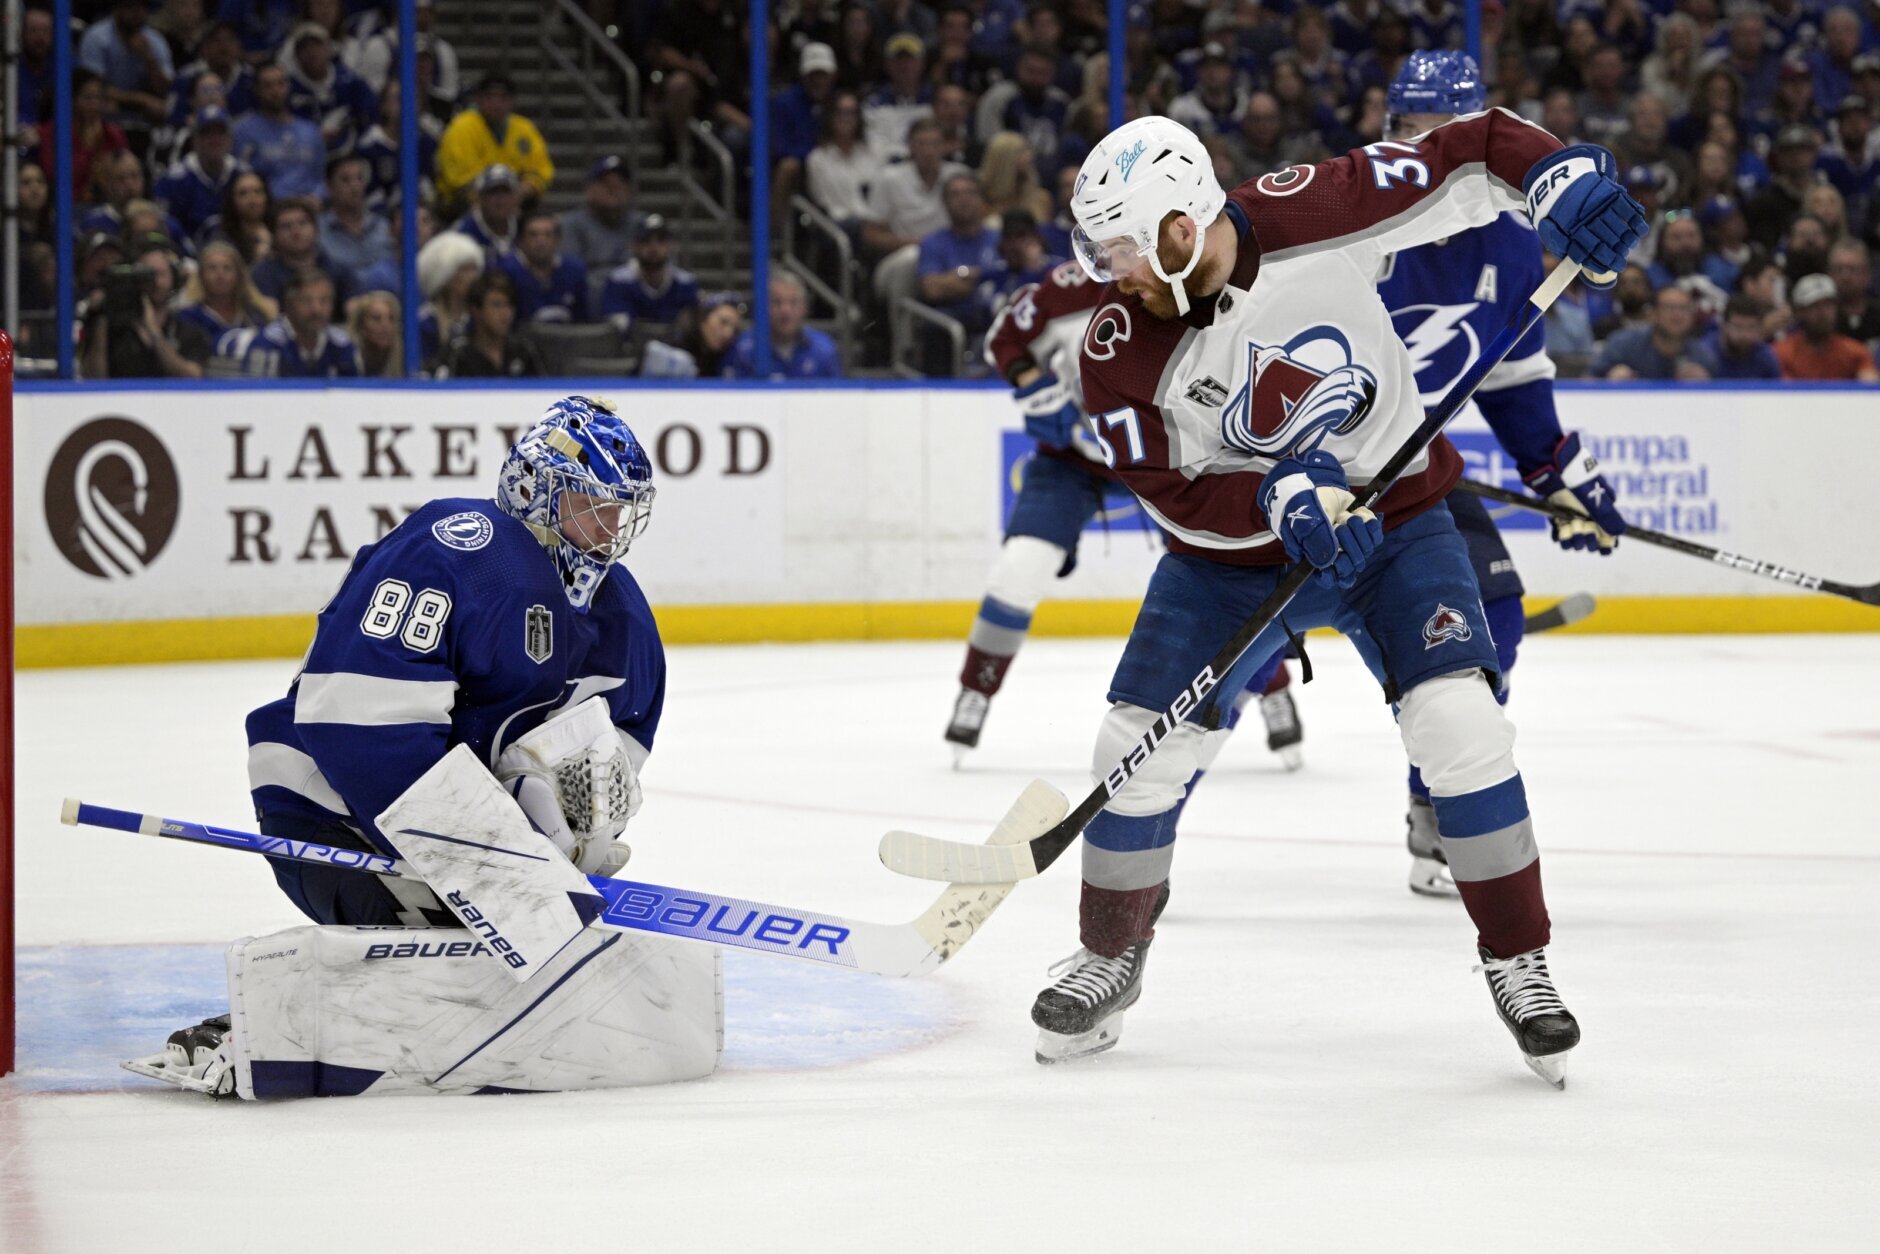 https://wtop.com/wp-content/uploads/2022/06/Stanley_Cup_Avalanche_Lightning_Hockey_29005-1880x1254.jpg